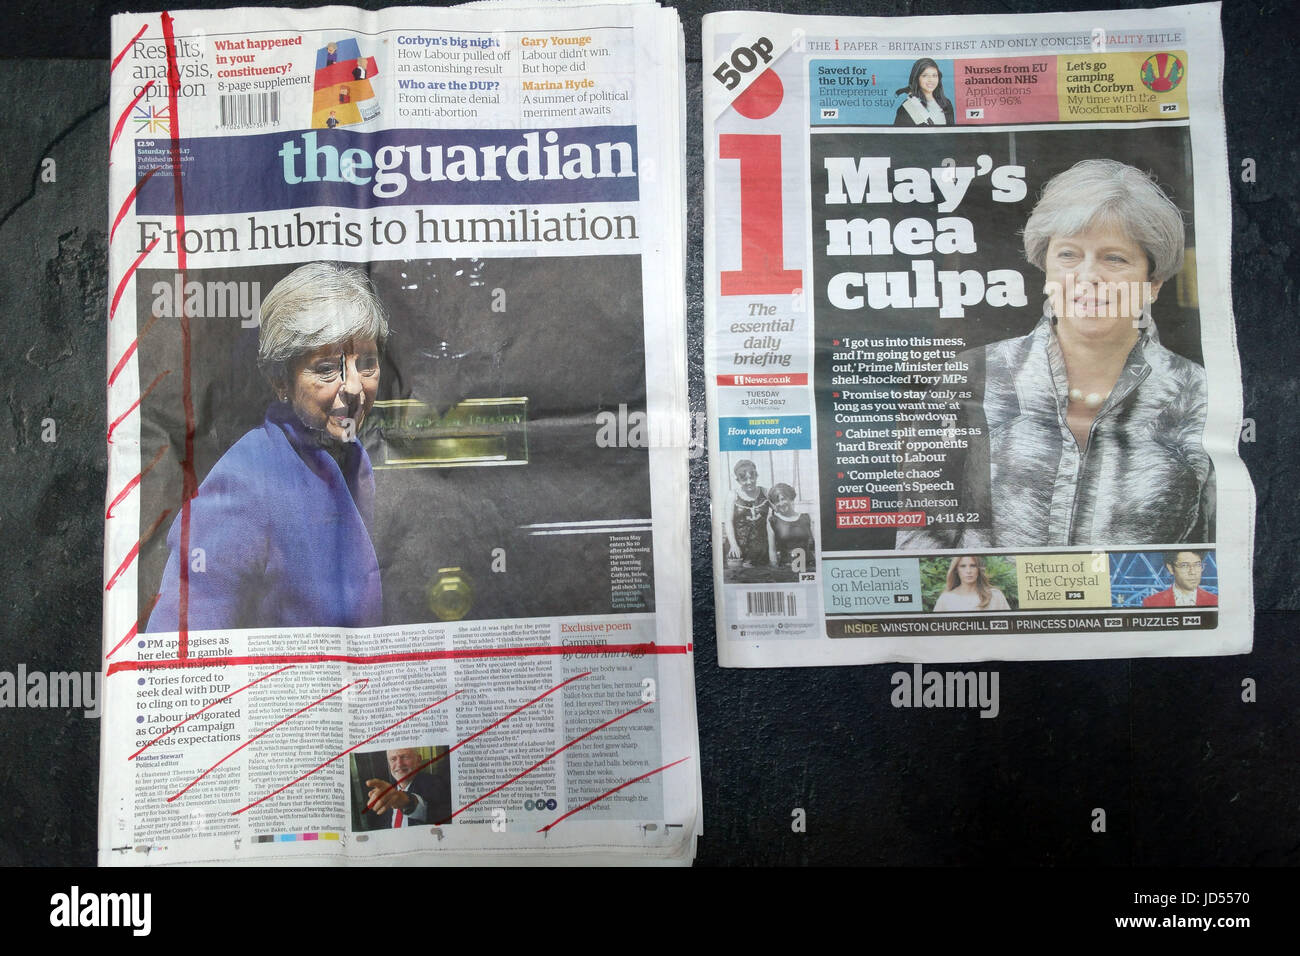 Uk S Guardian Newspaper To Switch To Tabloid Format In Early 2018daily Stock Photo Alamy